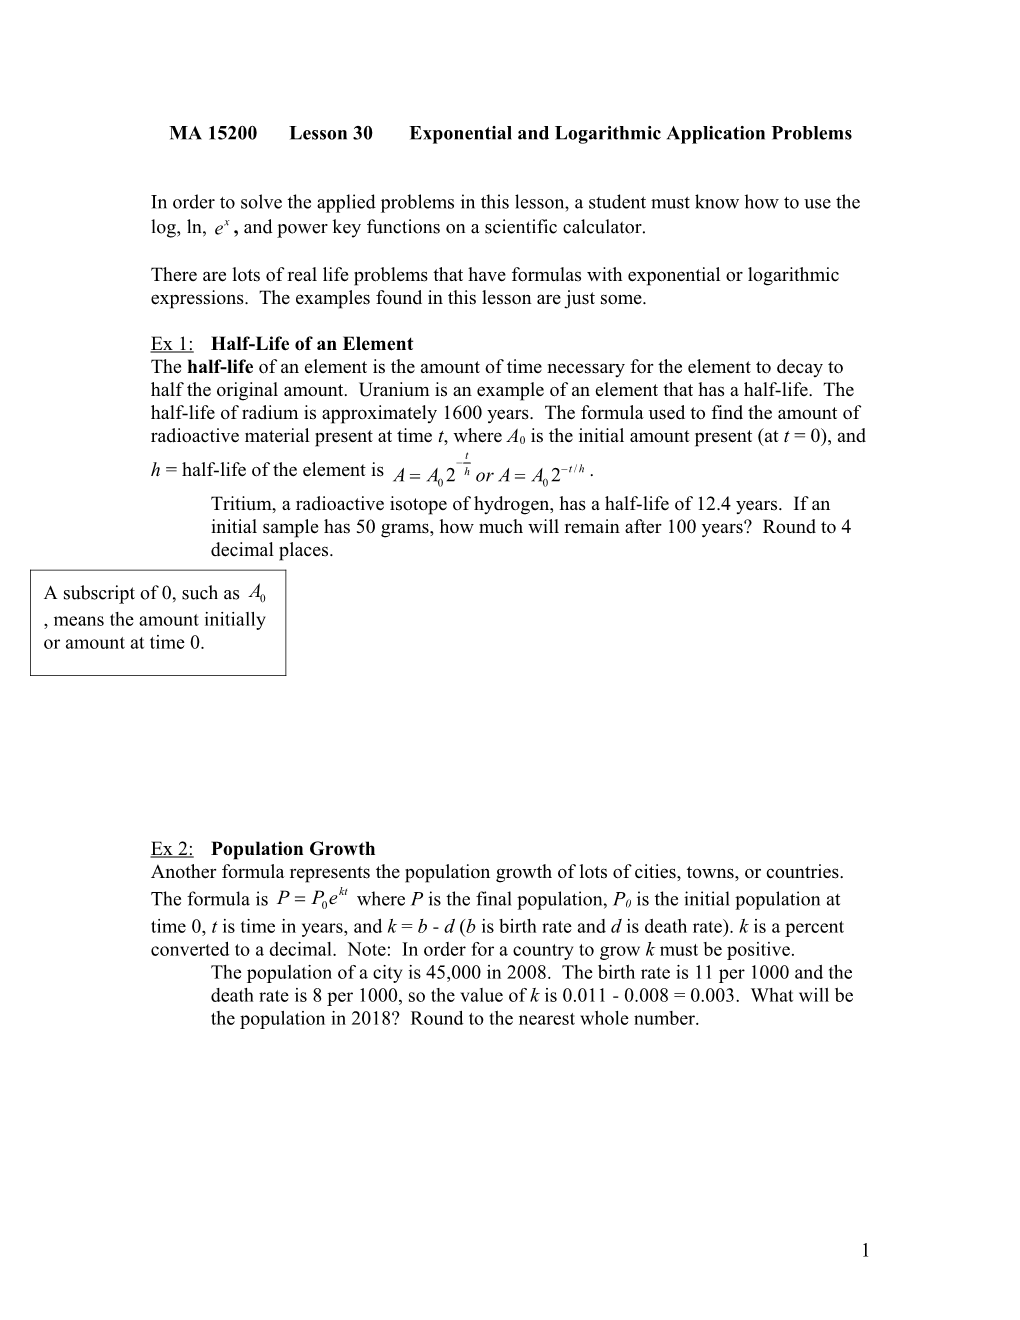 MA 15200Lesson 30Exponential and Logarithmic Application Problems